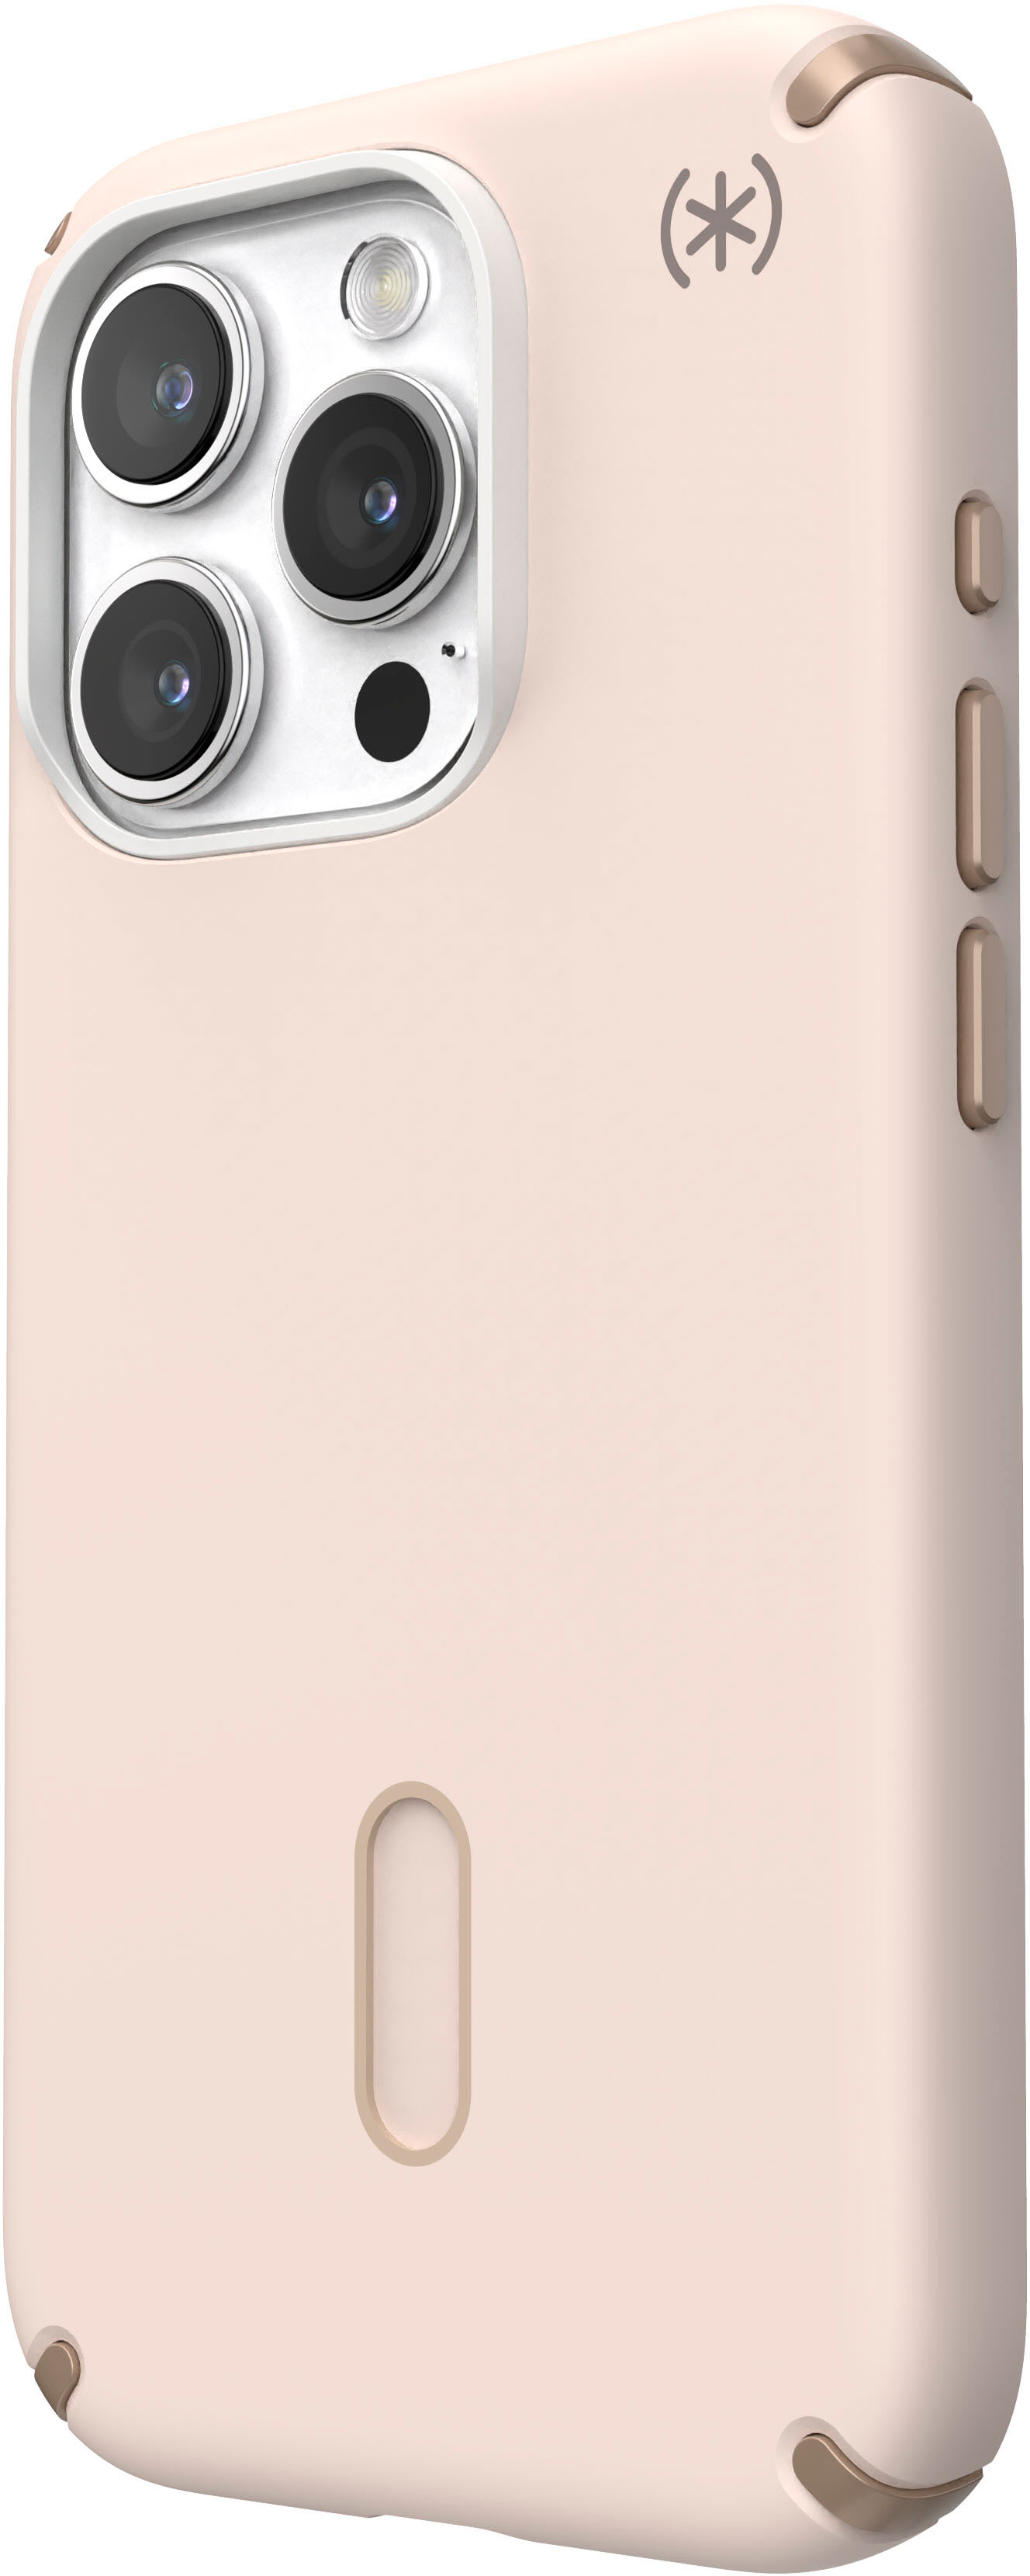 JUSPHY Phone Case Compatible With iPhone 12 Pro, Cracked Gold